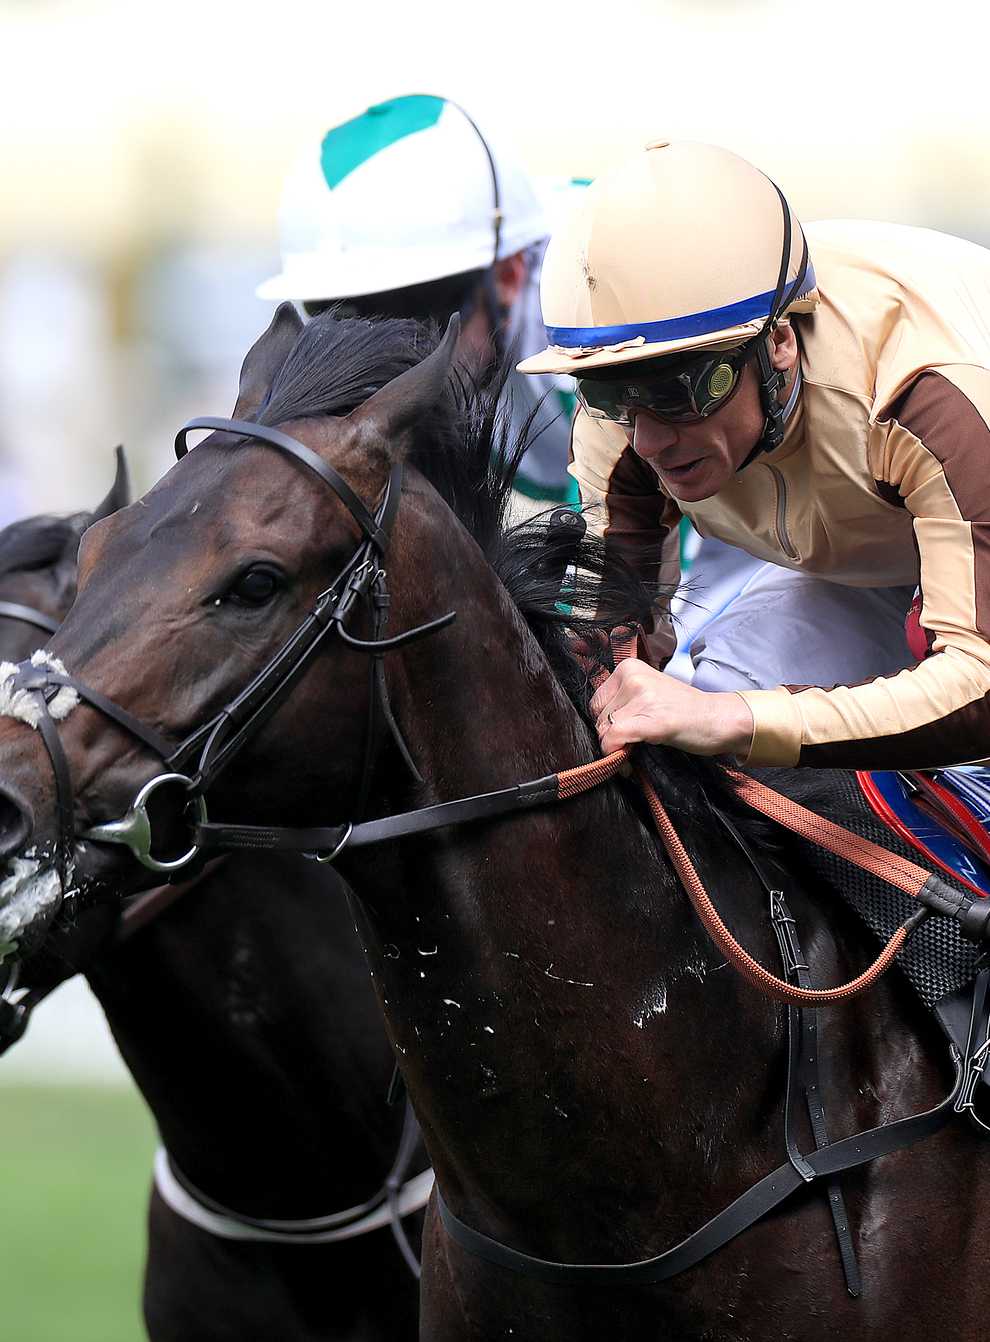 A'Ali and Frankie Dettori on the way to victory at Royal Ascot